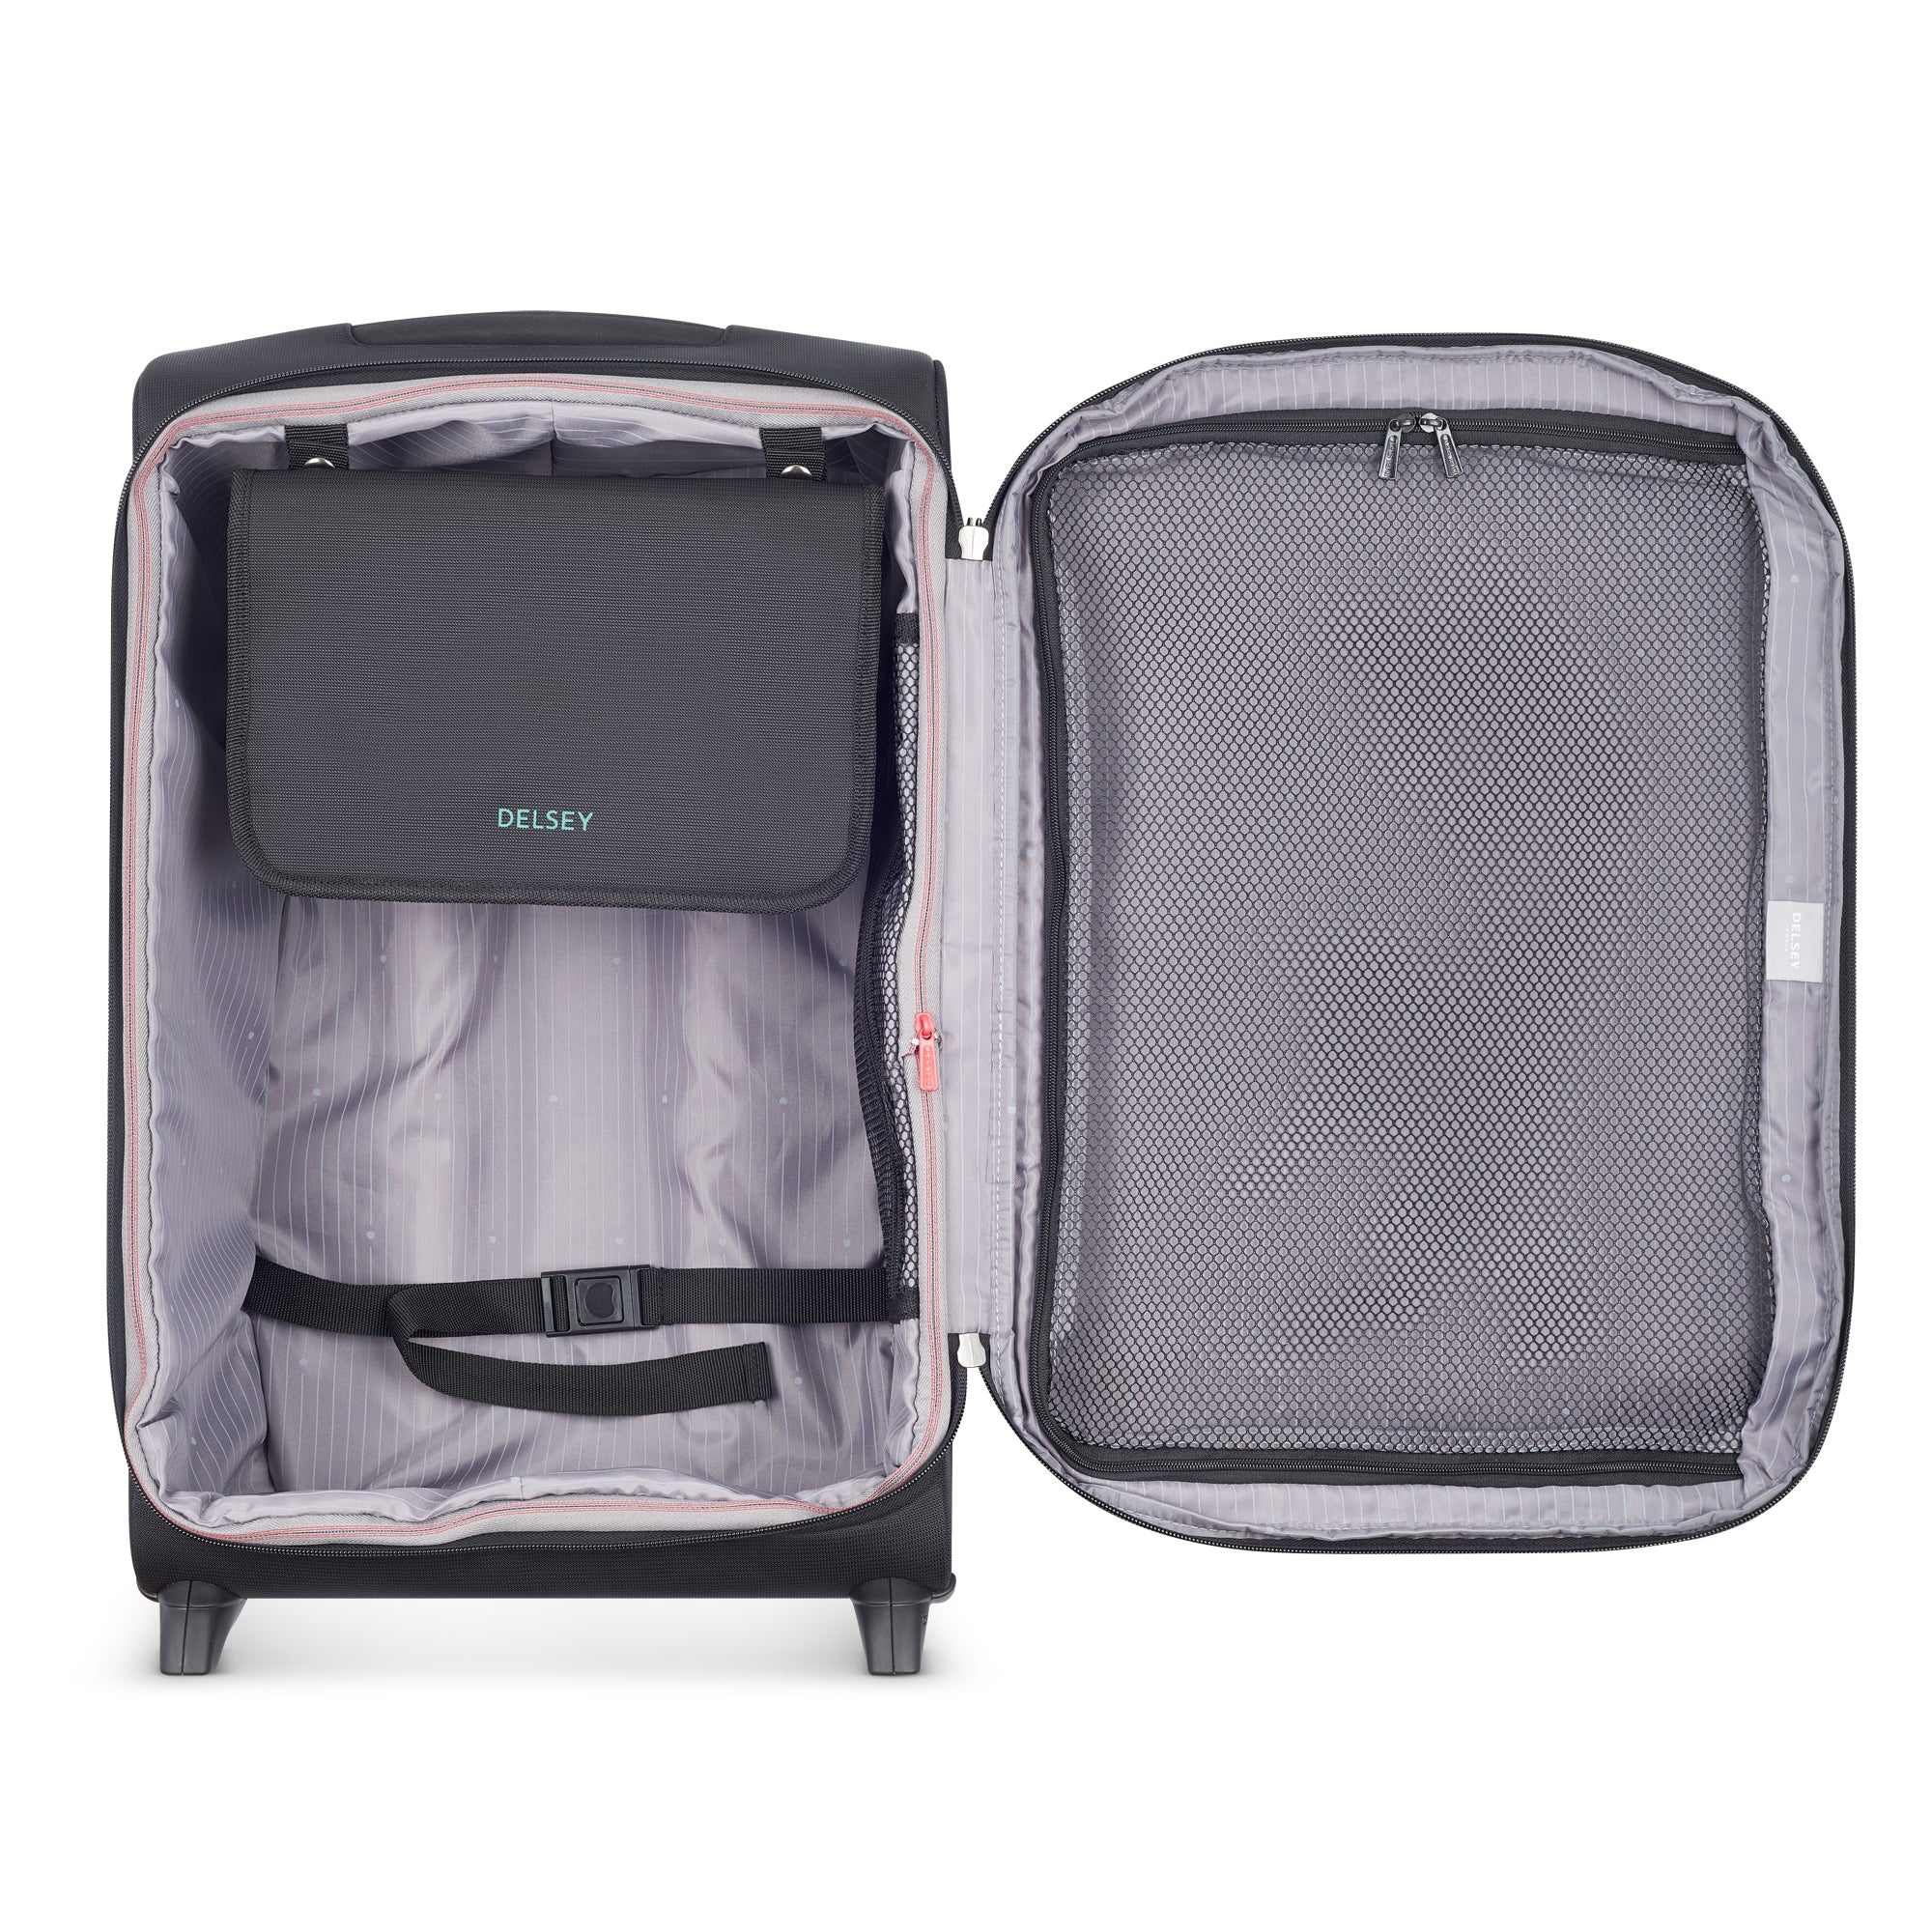 Delsey St Tropez - 55 cm Expandable Cabin Luggage by Delsey Travel Gear  (StTropez-55cm-Cabin)